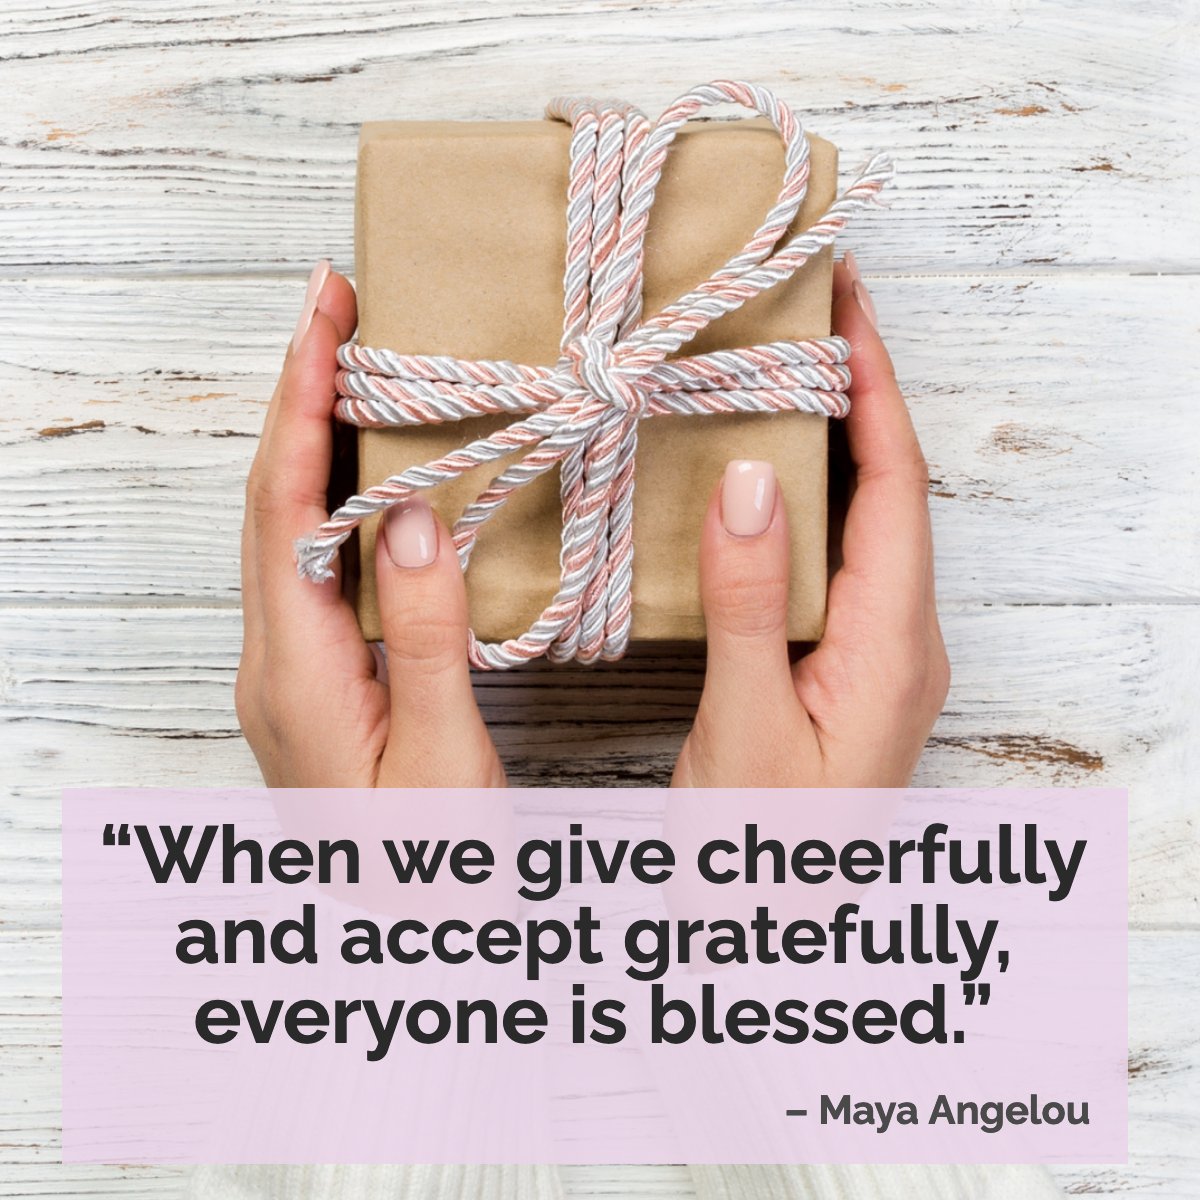 'When we give cheerfully and accept gratefully, everyone is blessed.' 
— Maya Angelou 🙏

 #wisdomquote #wisdomoftheday #quotegram #quoteoftheday✏️  #educationispower
 #eastvalerealtor #eastvalerealestate #eastvale #chinohillsrealtor #chinohillsrealestate